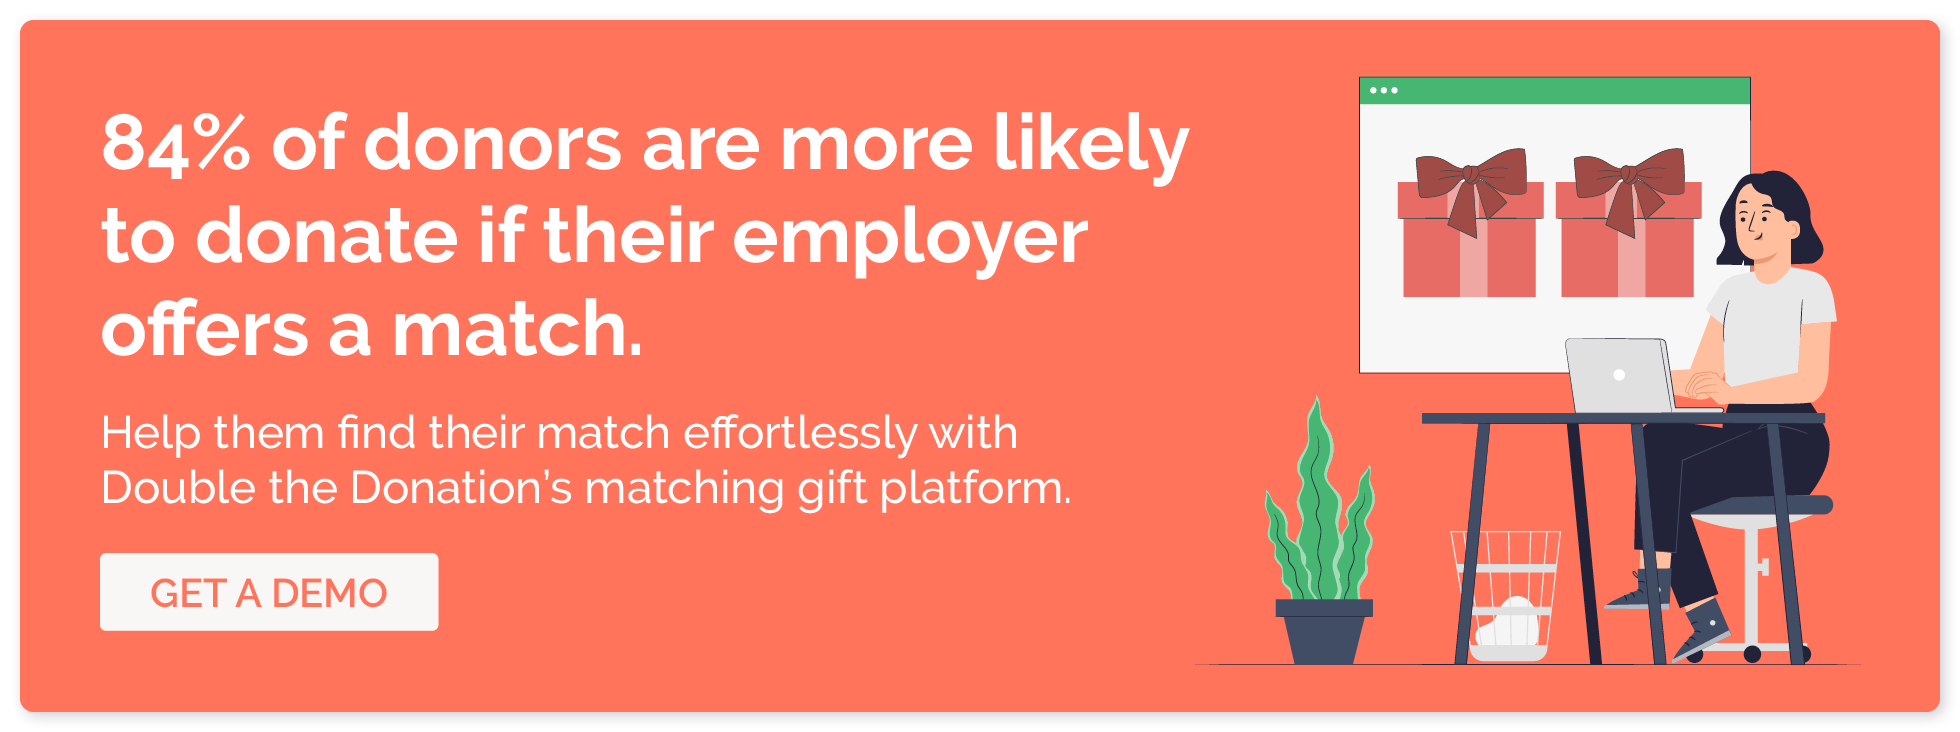 84% of donors are more likely to donate if their employer offers a match. Help them find their match effortlessly with Double the Donation’s matching gift platform. Click here for a demo.